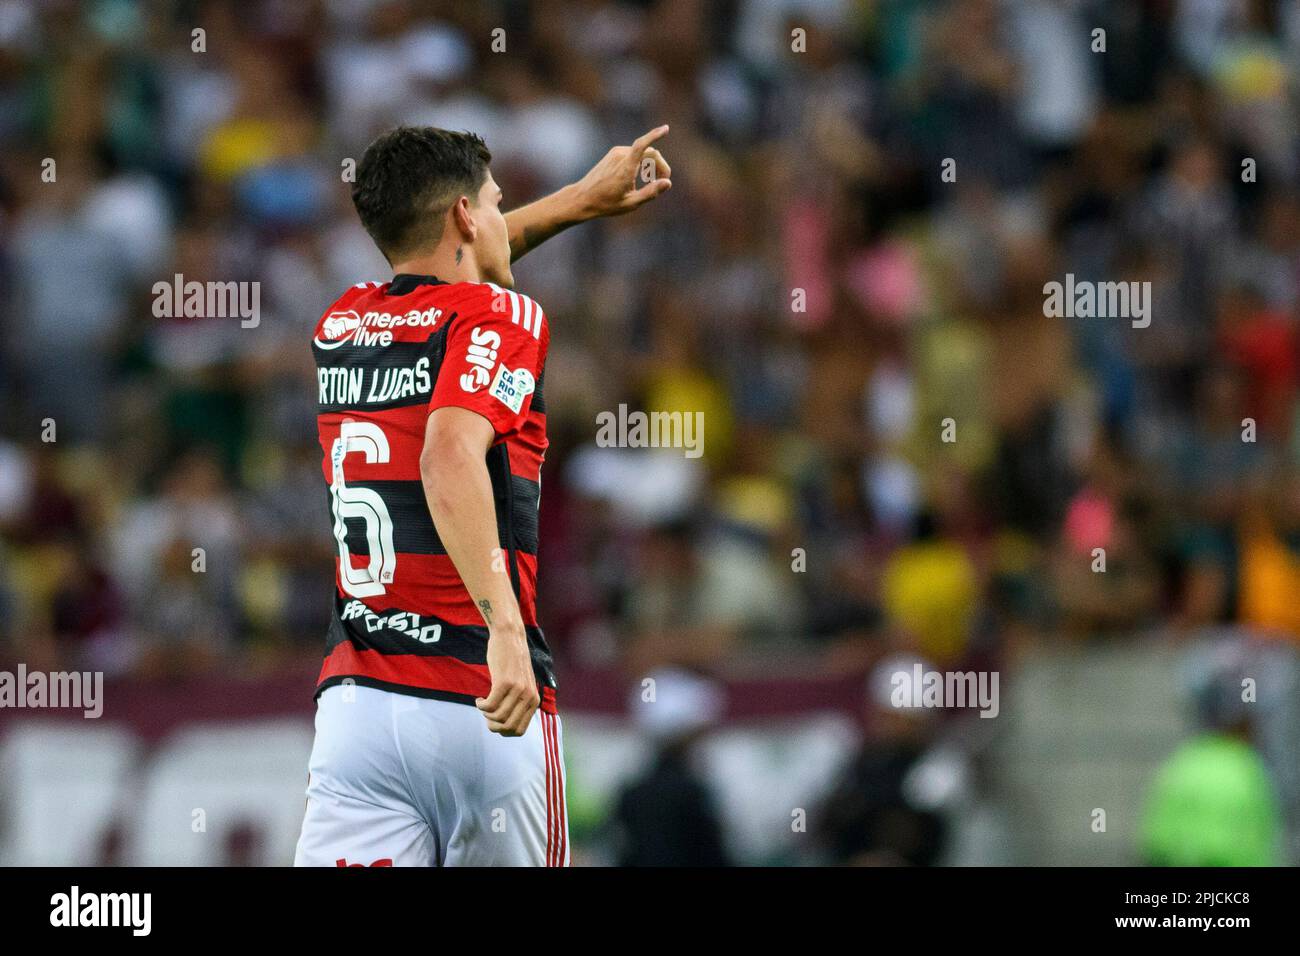 Ayrton Lucas of FC Spartak Moscow in Action Editorial Stock Photo - Image  of player, game: 153781333